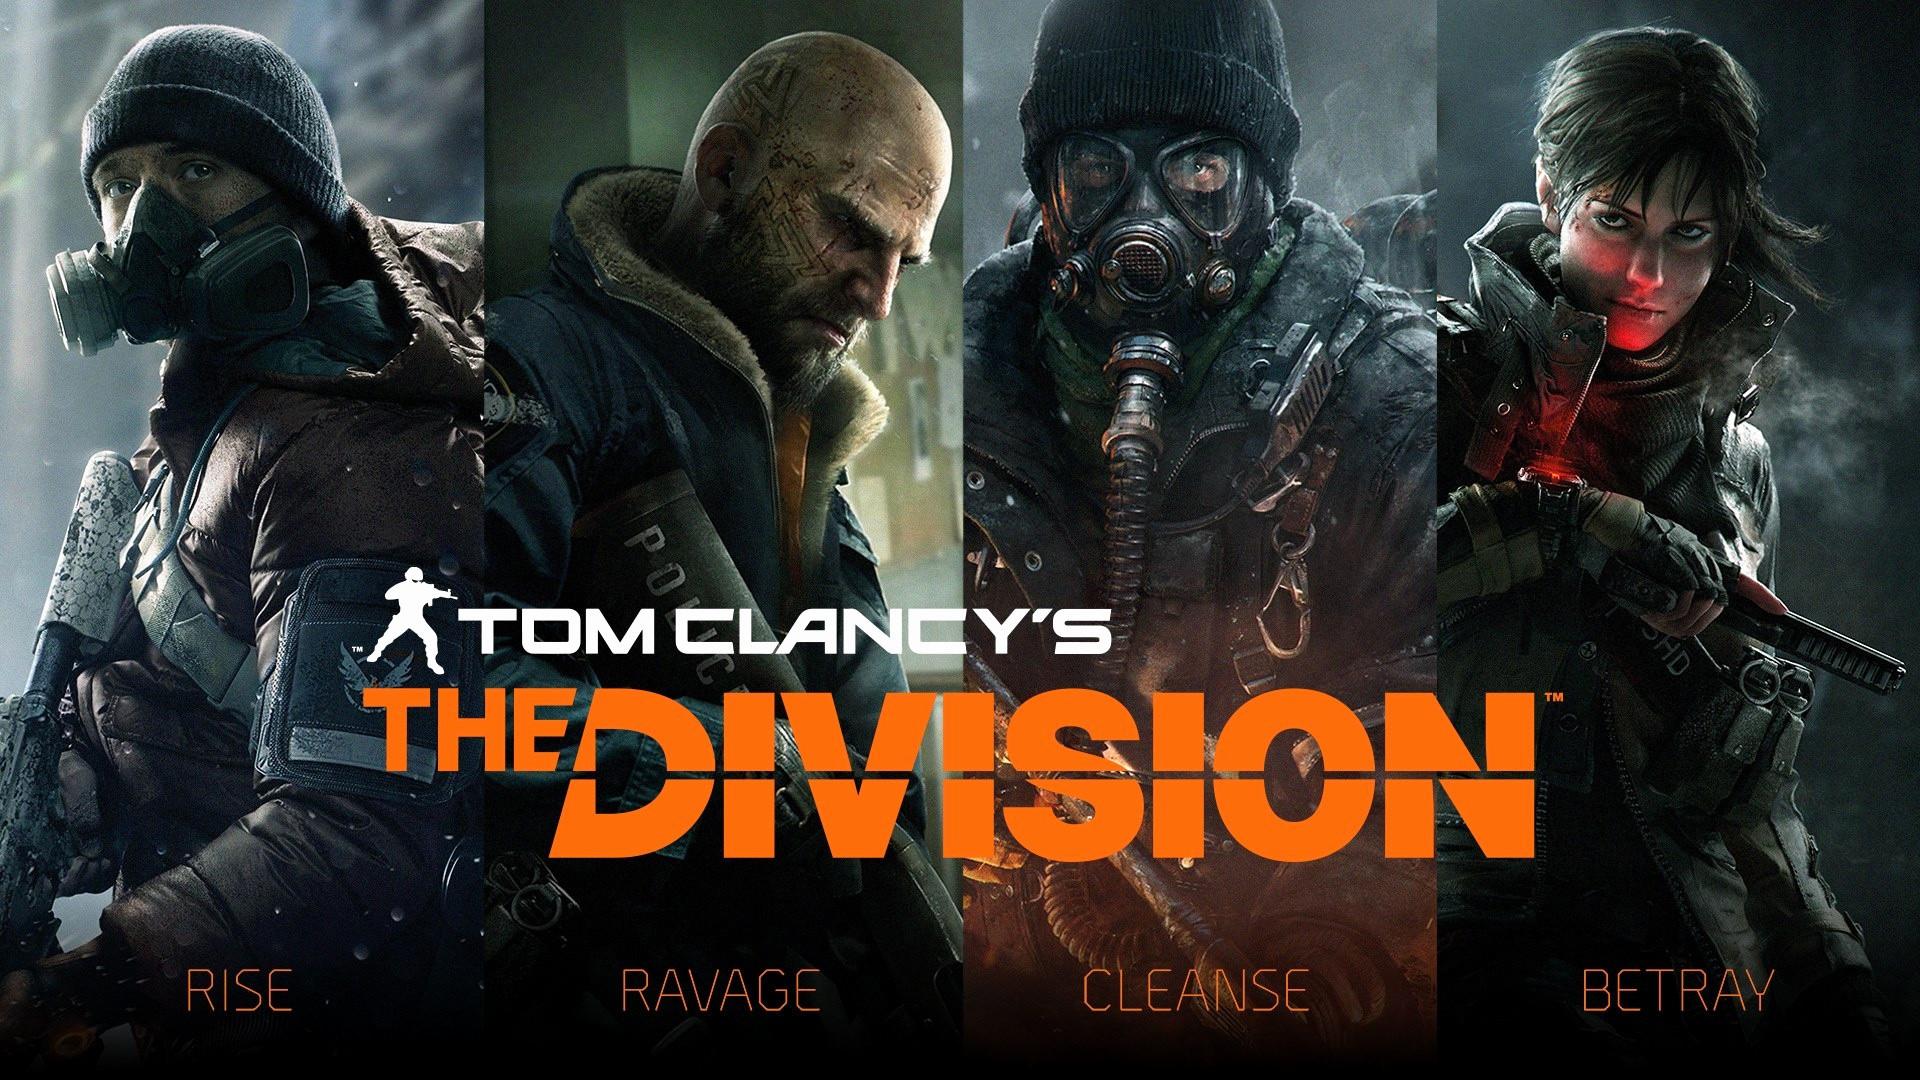 The Division Wallpaper background picture